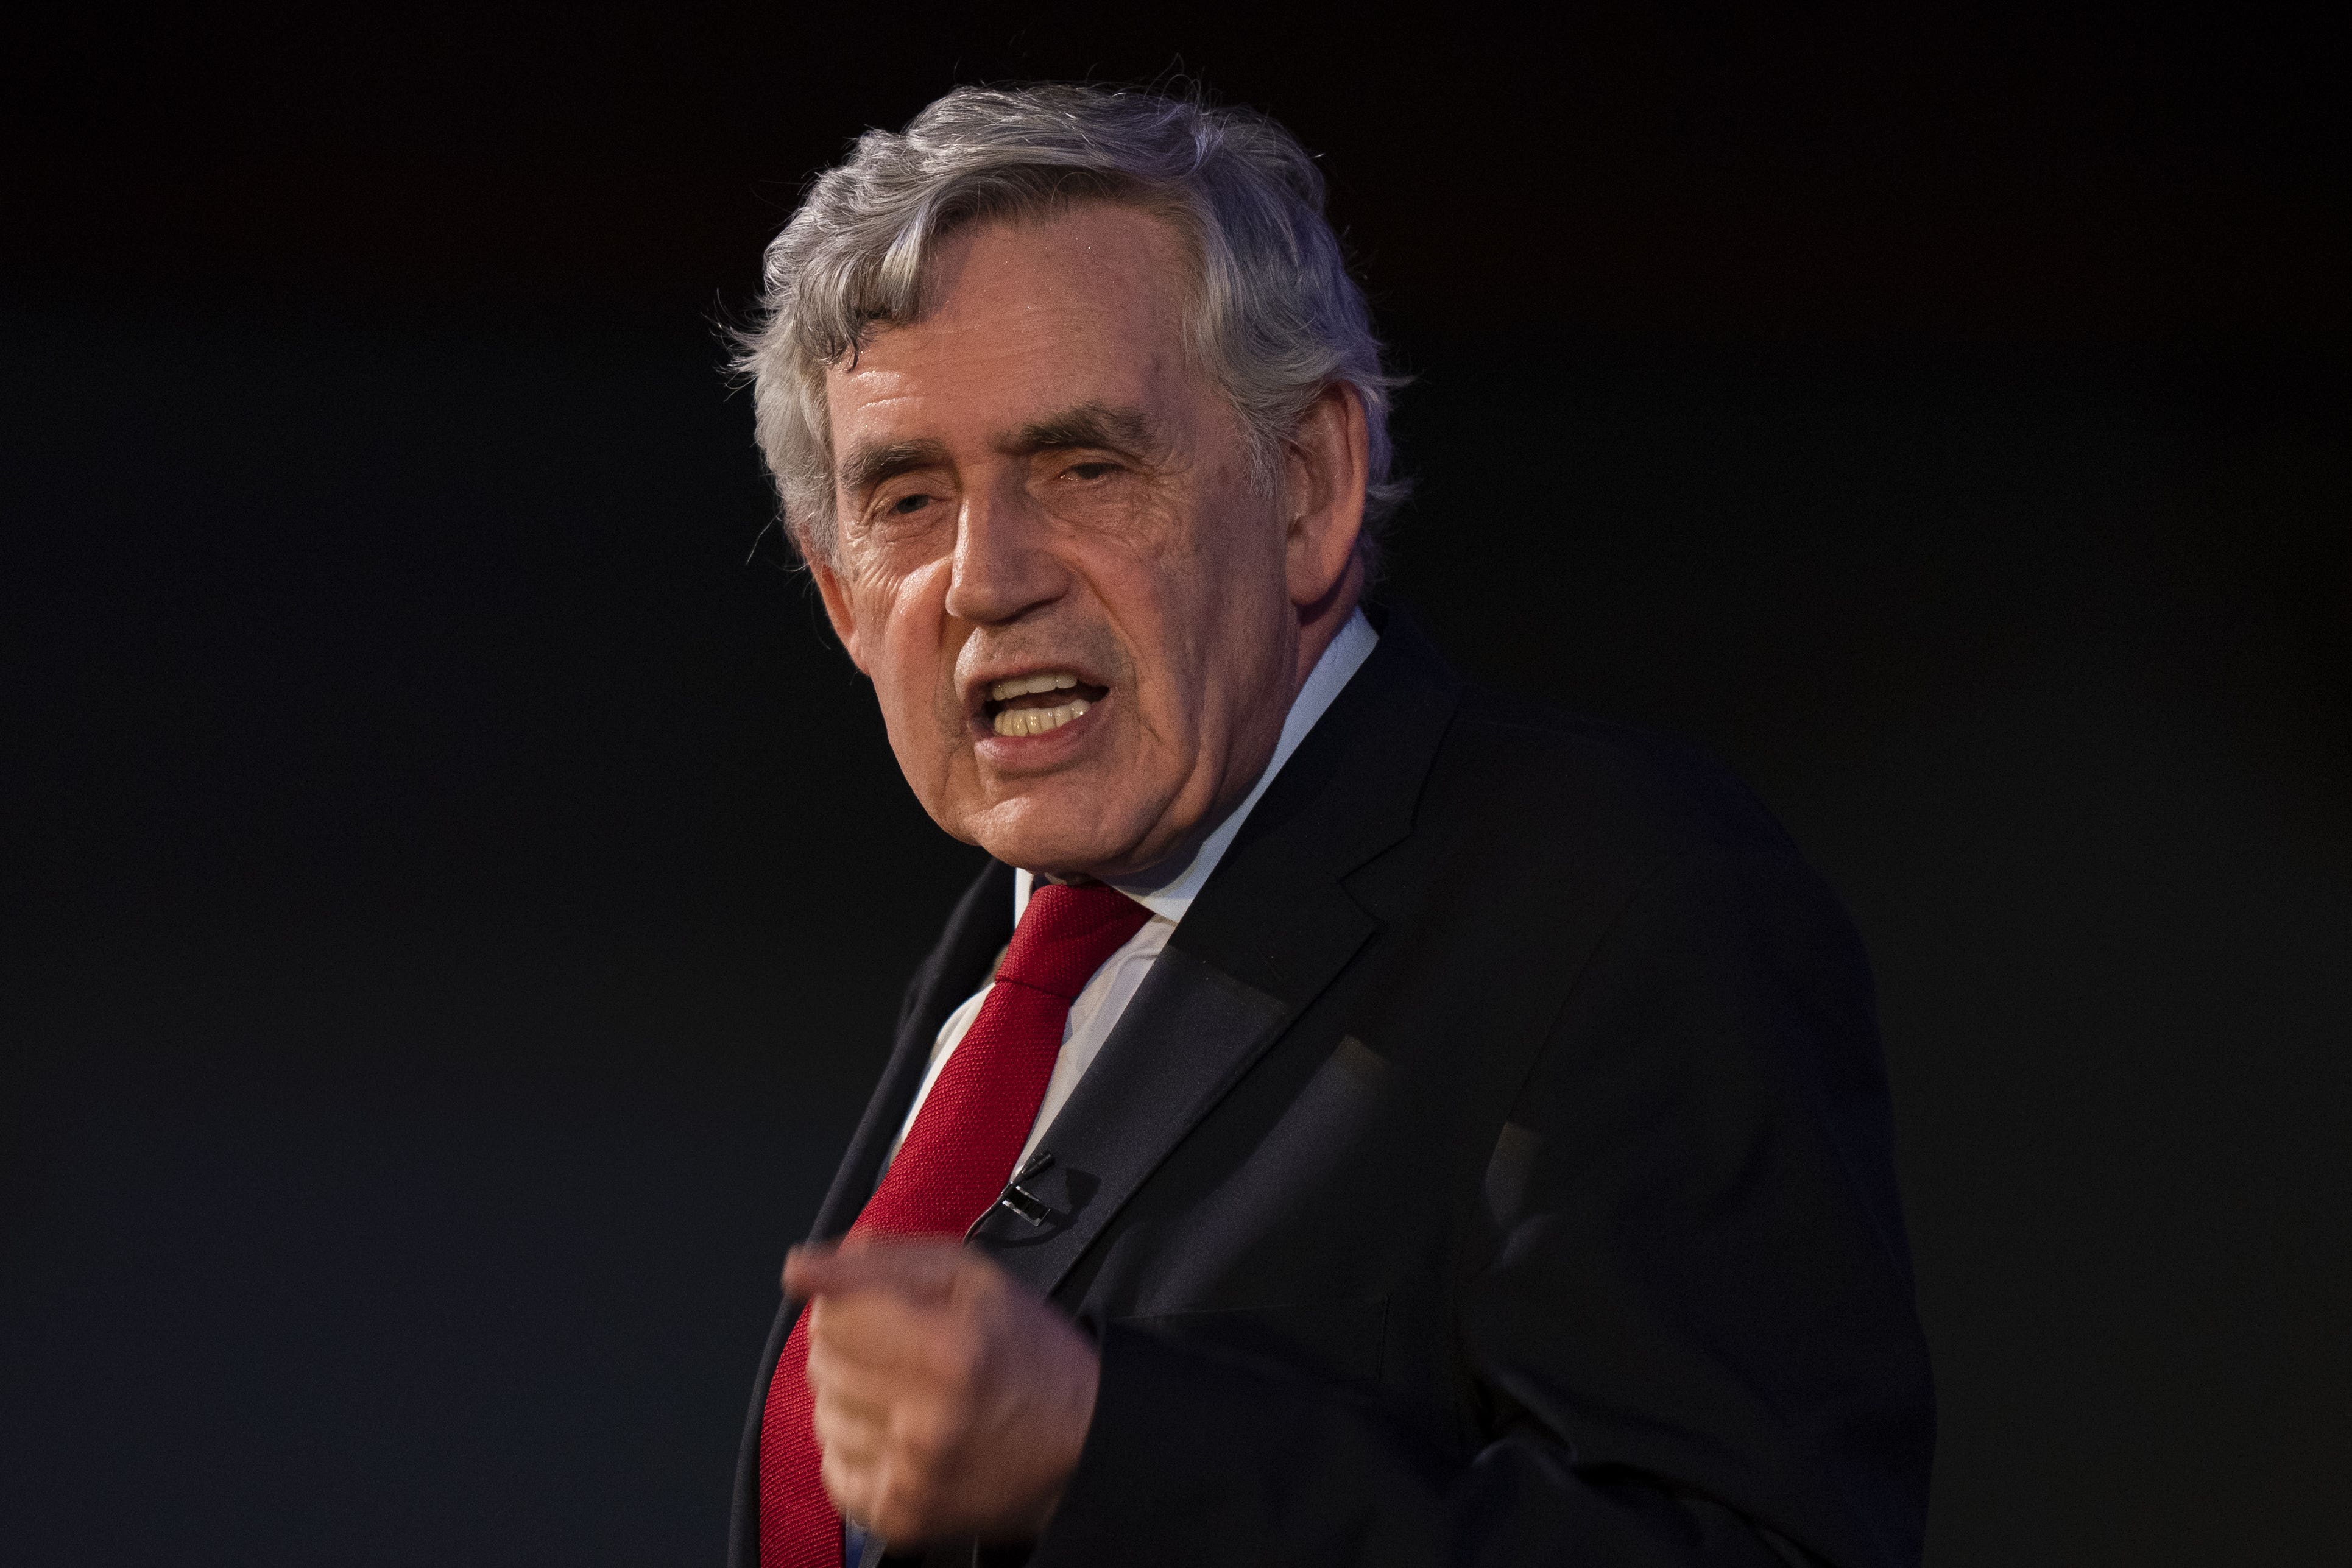 Former prime minister Gordon Brown, pictured speaking at a previous event. (Jane Barlow/PA)